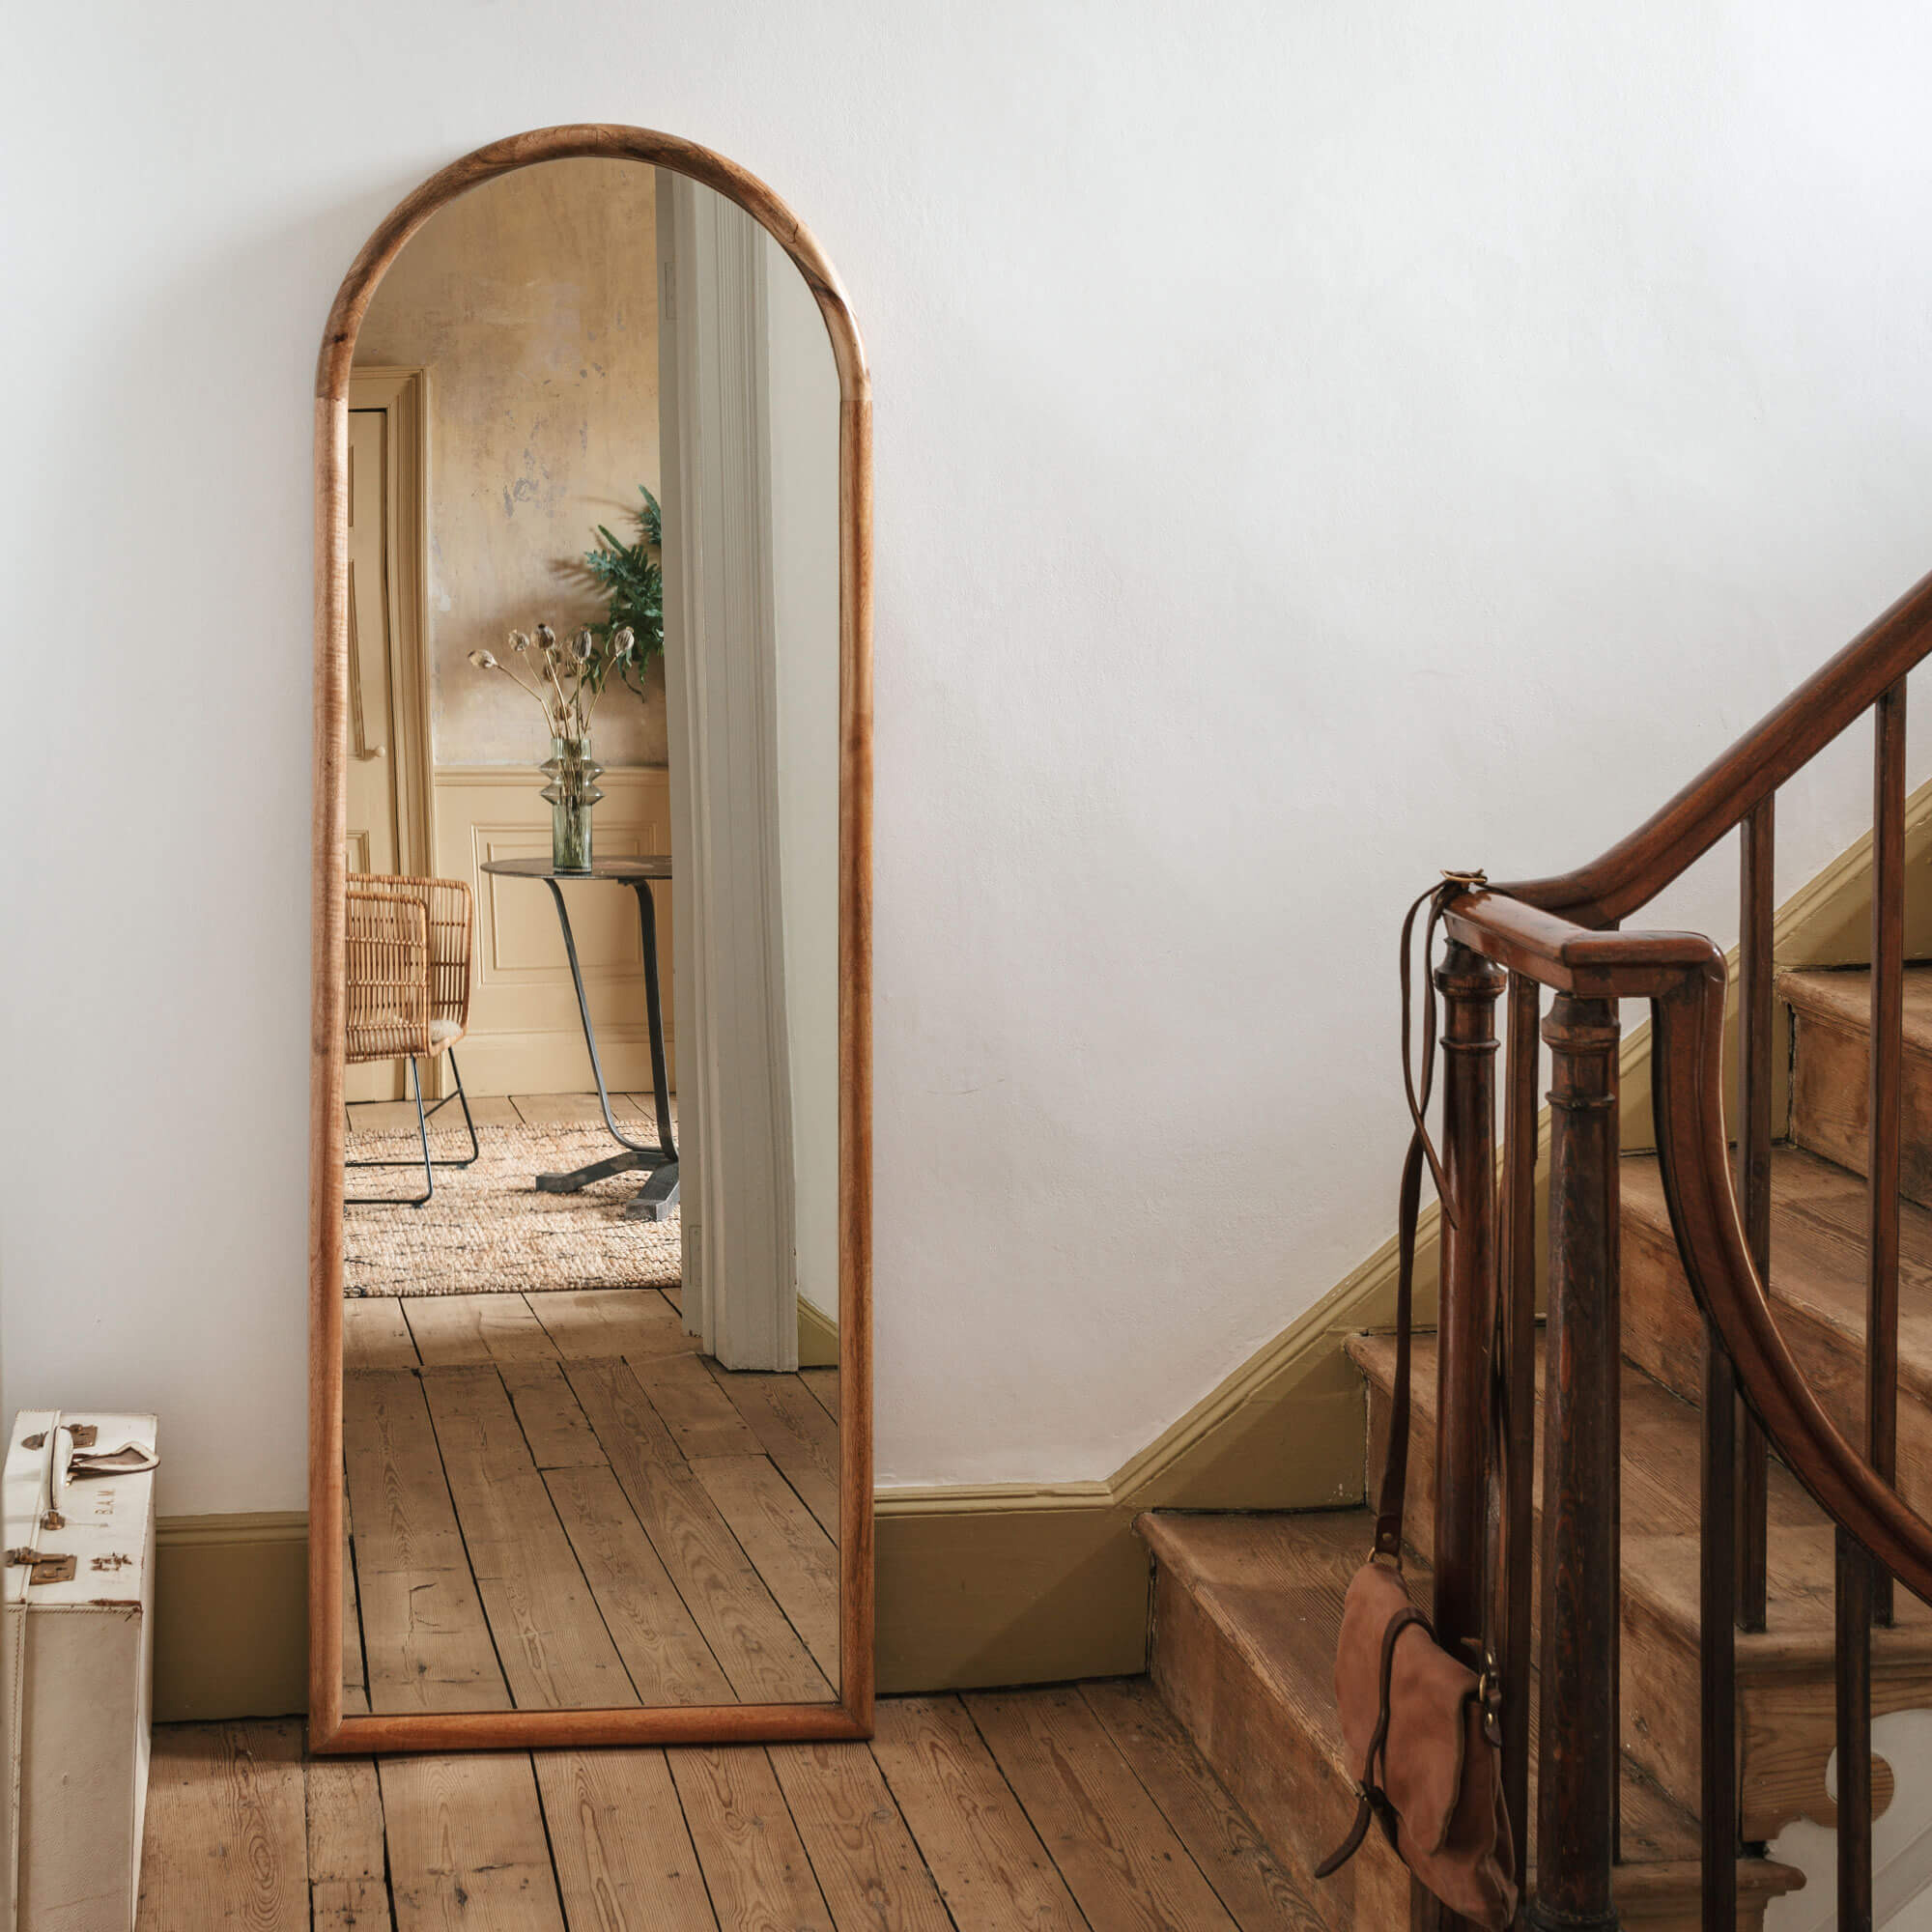 Walter Natural Wood Arched Mirror - image 1